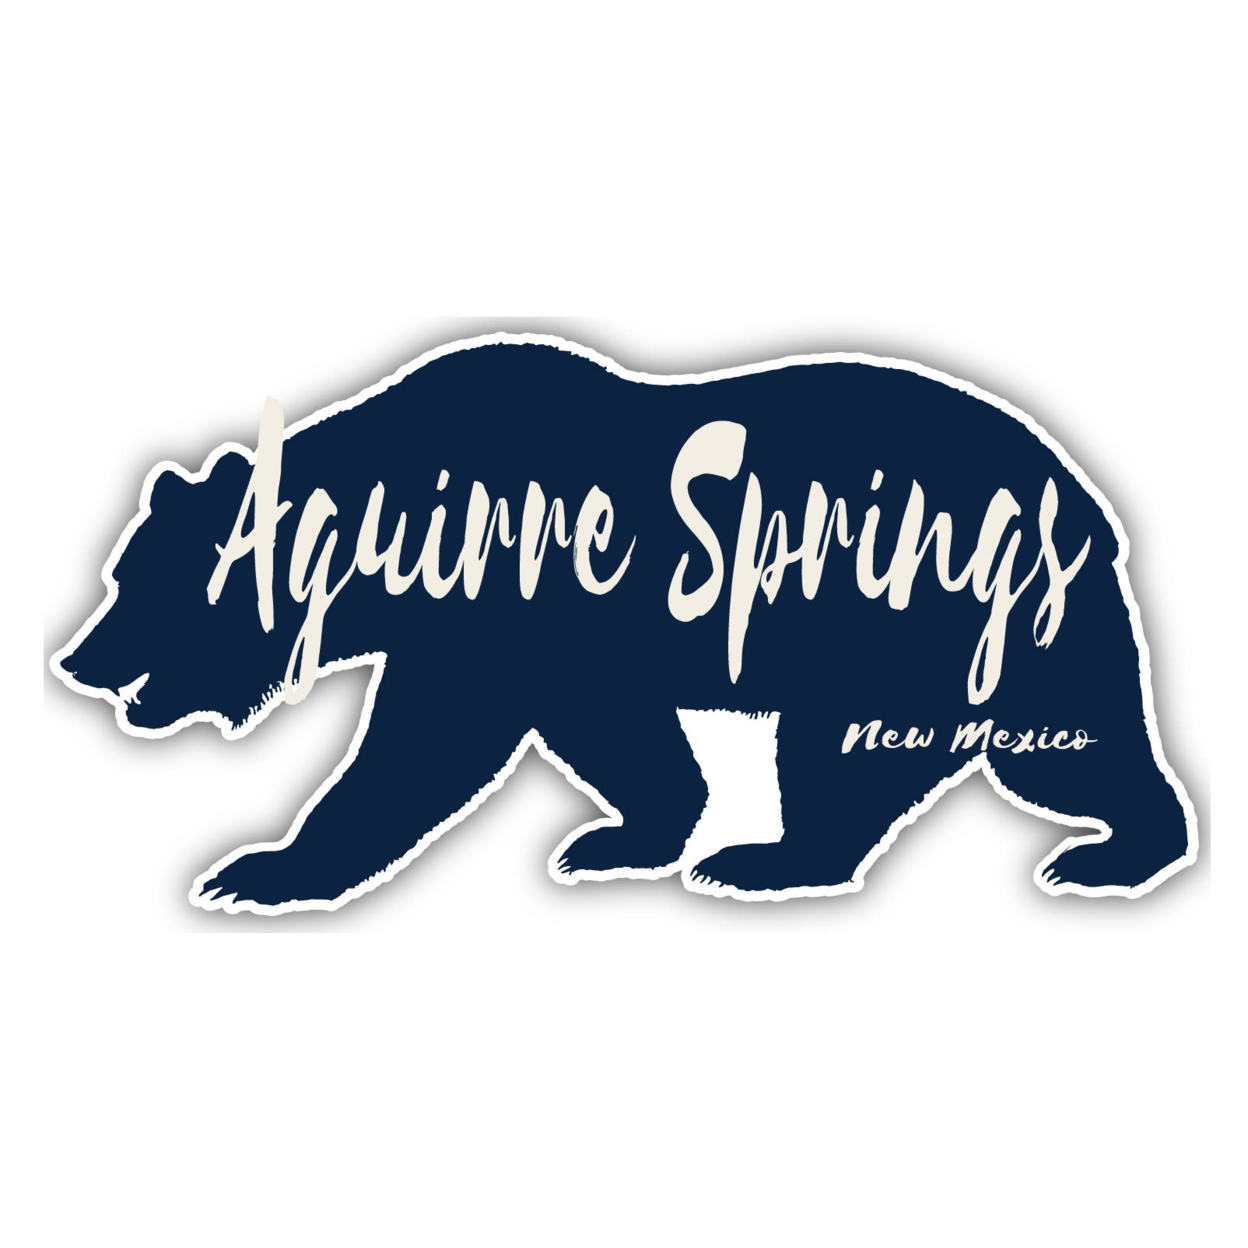 Aguirre Springs New Mexico Souvenir Decorative Stickers (Choose Theme And Size) - Single Unit, 6-Inch, Bear